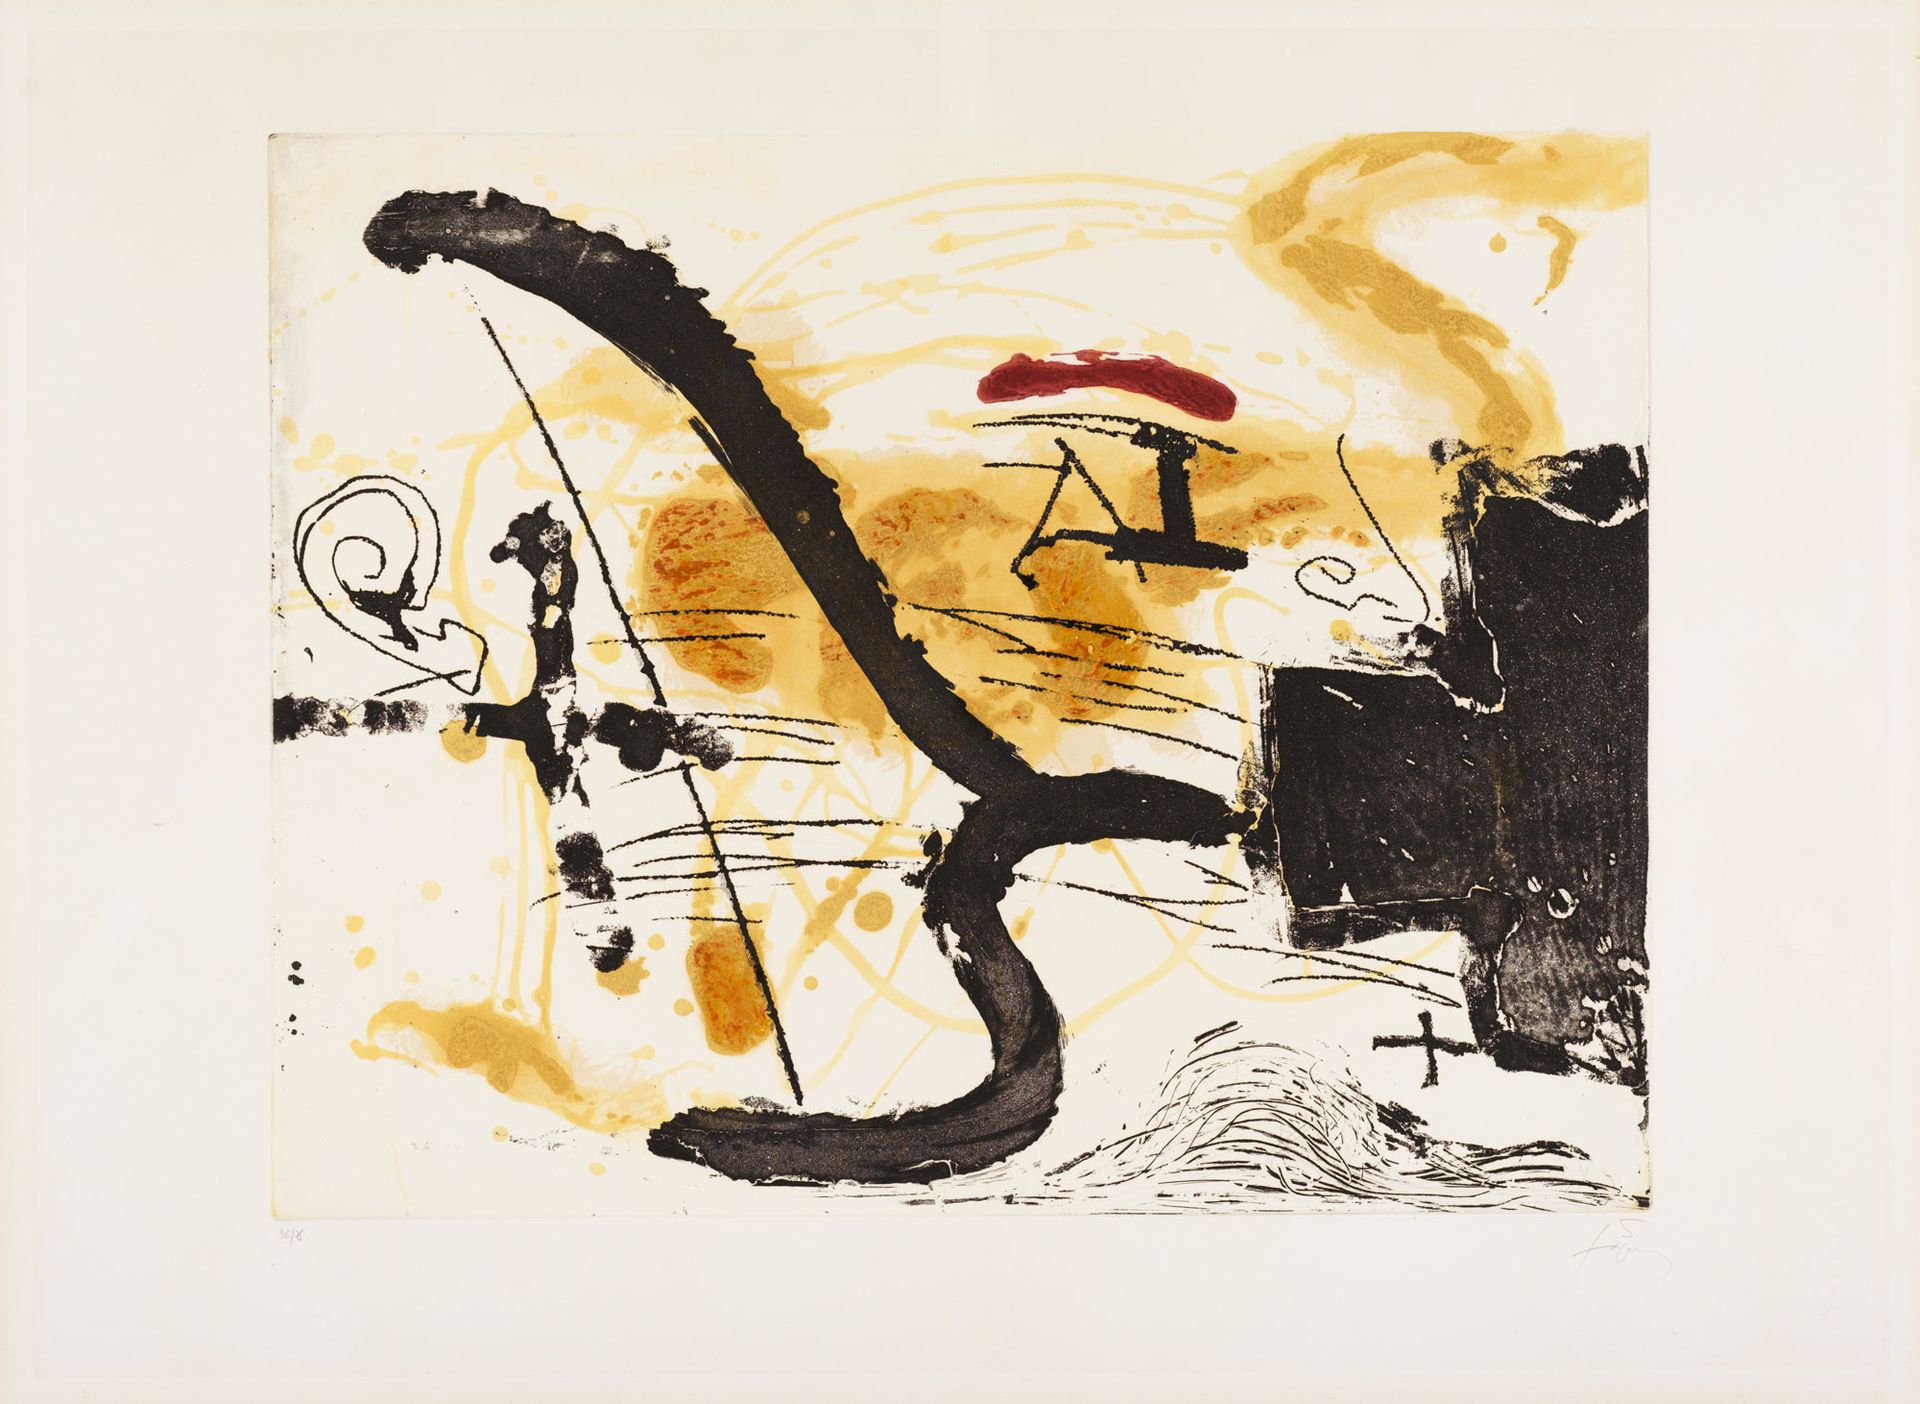 ANTONI TAPIES (1923-2012) UNTITLED
Aquatint in color on wove paper
Signed and nu&hellip;